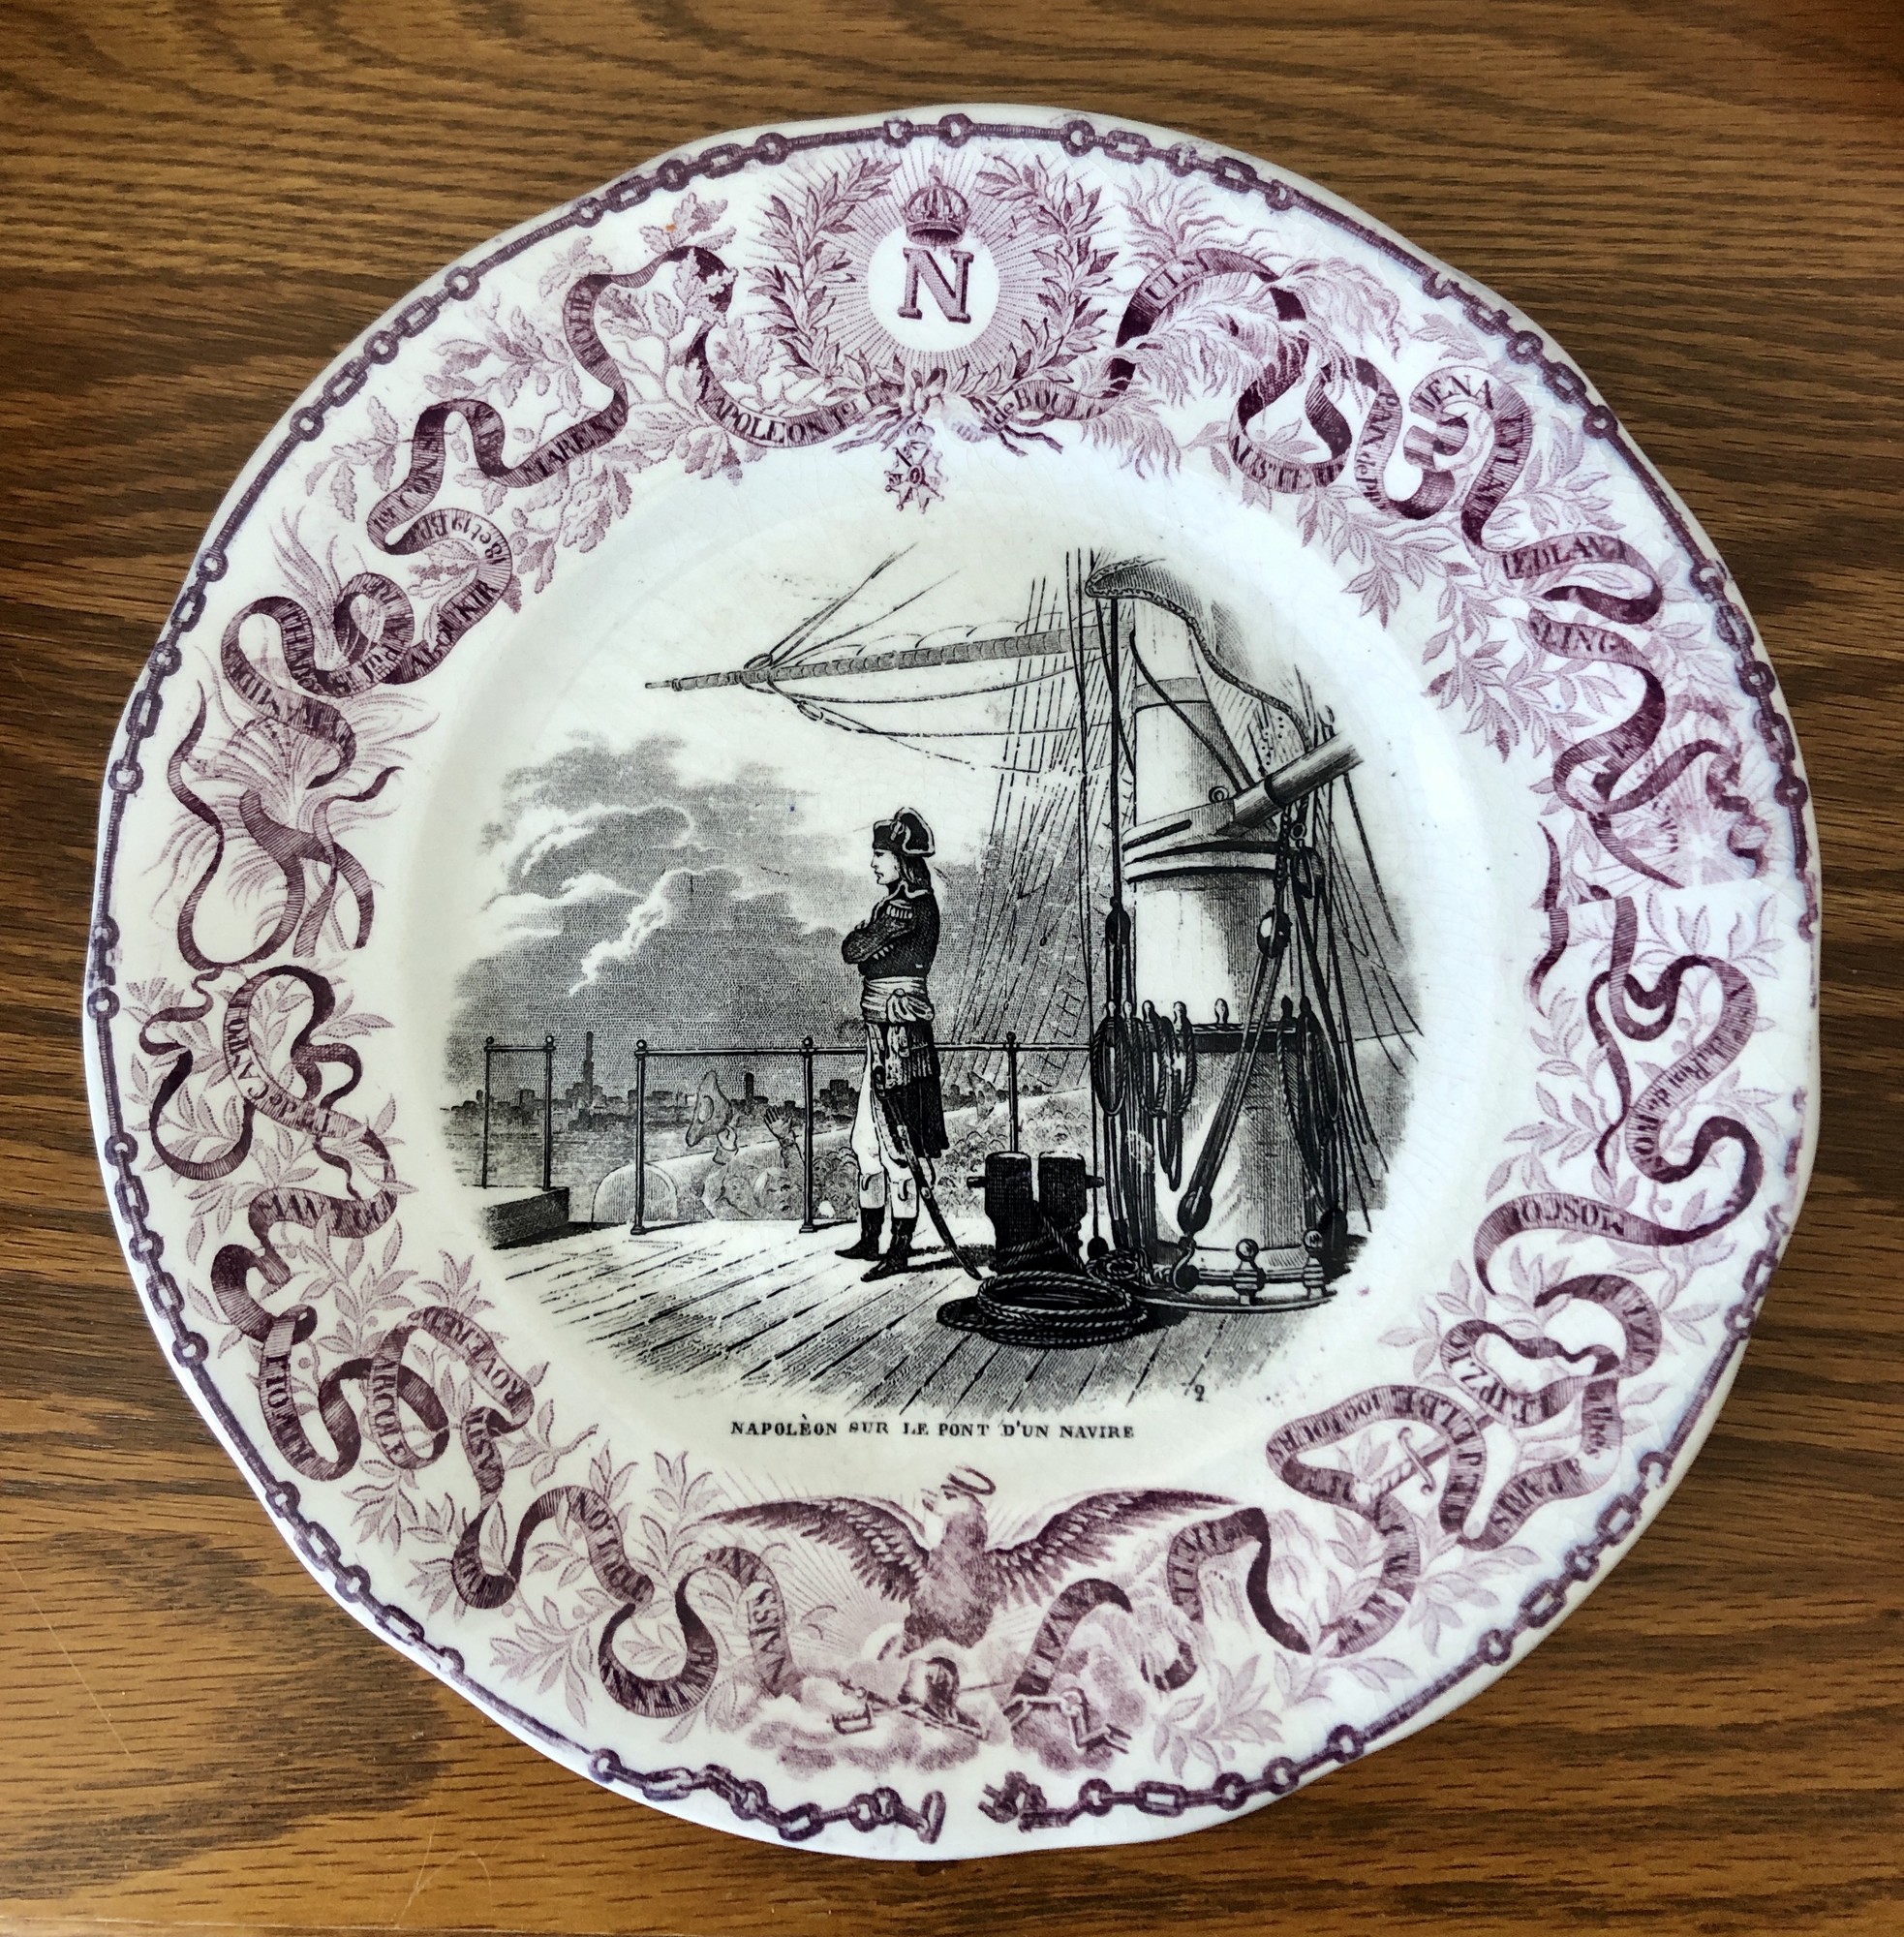 French Napoleon Commerative Assiettes Parlantes Plate. c.1840s Napoleon Sur Le Pont D'un Navire
Assiettes Parlantes, or talking plates, are French transferware plates with sayings on them. The most collectible illustrate the life of a French hero such as the plates depicting Napoleon. Really unusual to find in purple. 8.